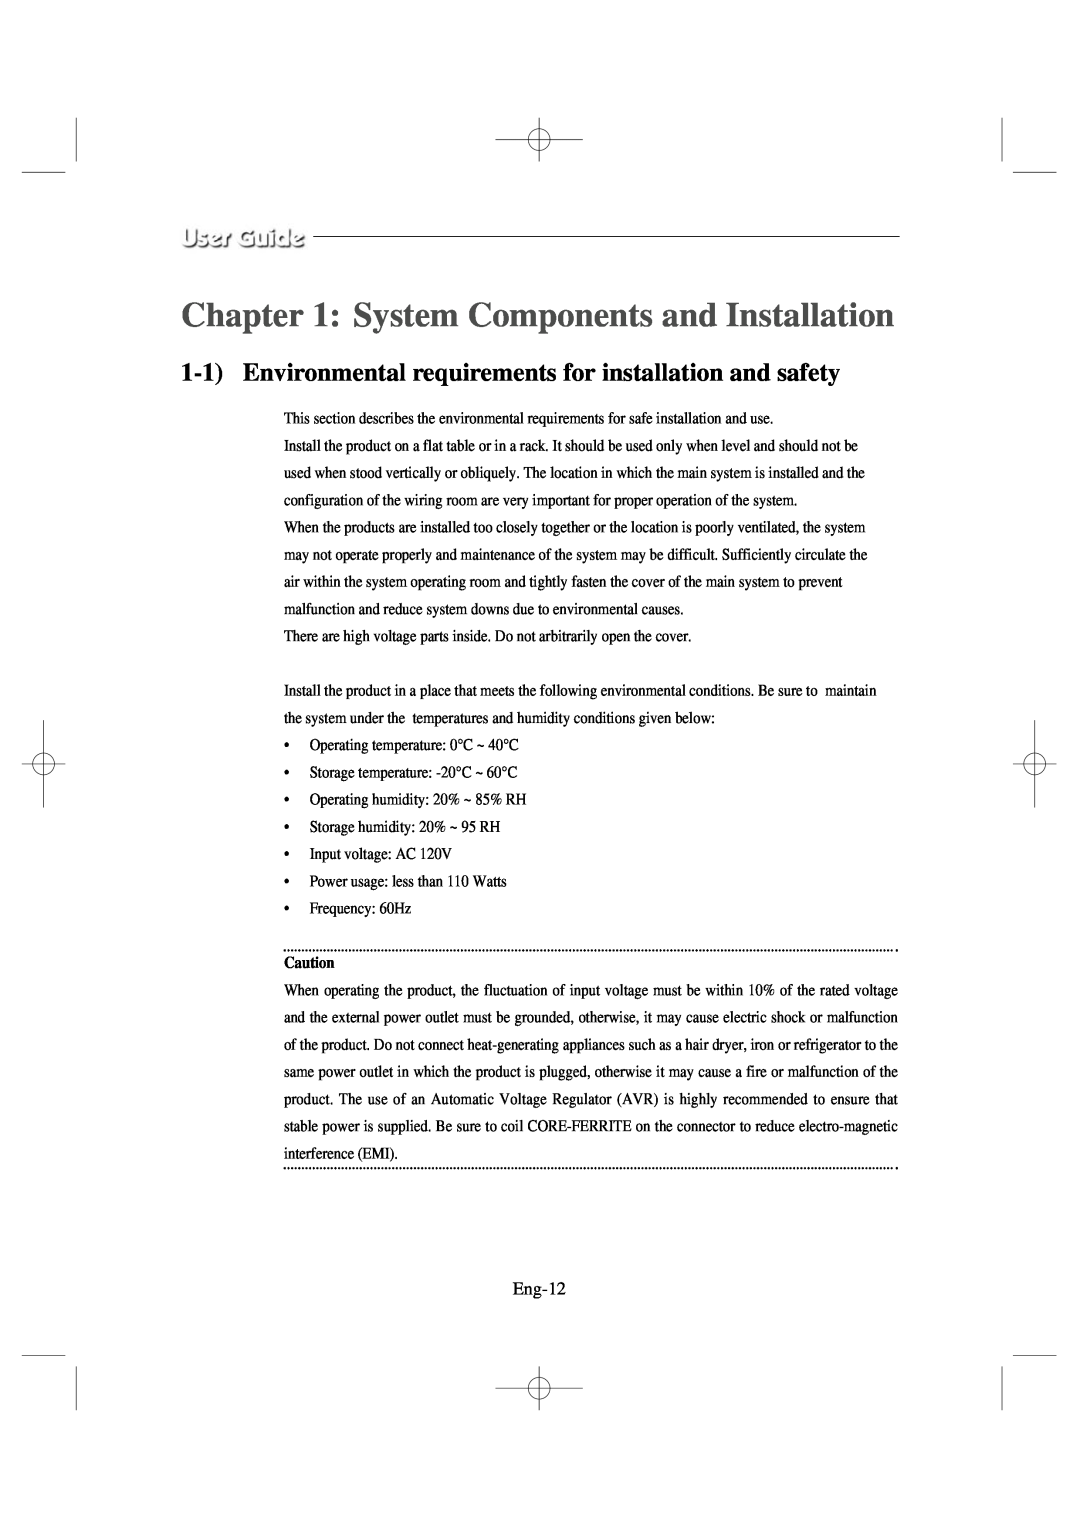 Samsung SSC17WEB manual System Components and Installation, Eng-12 